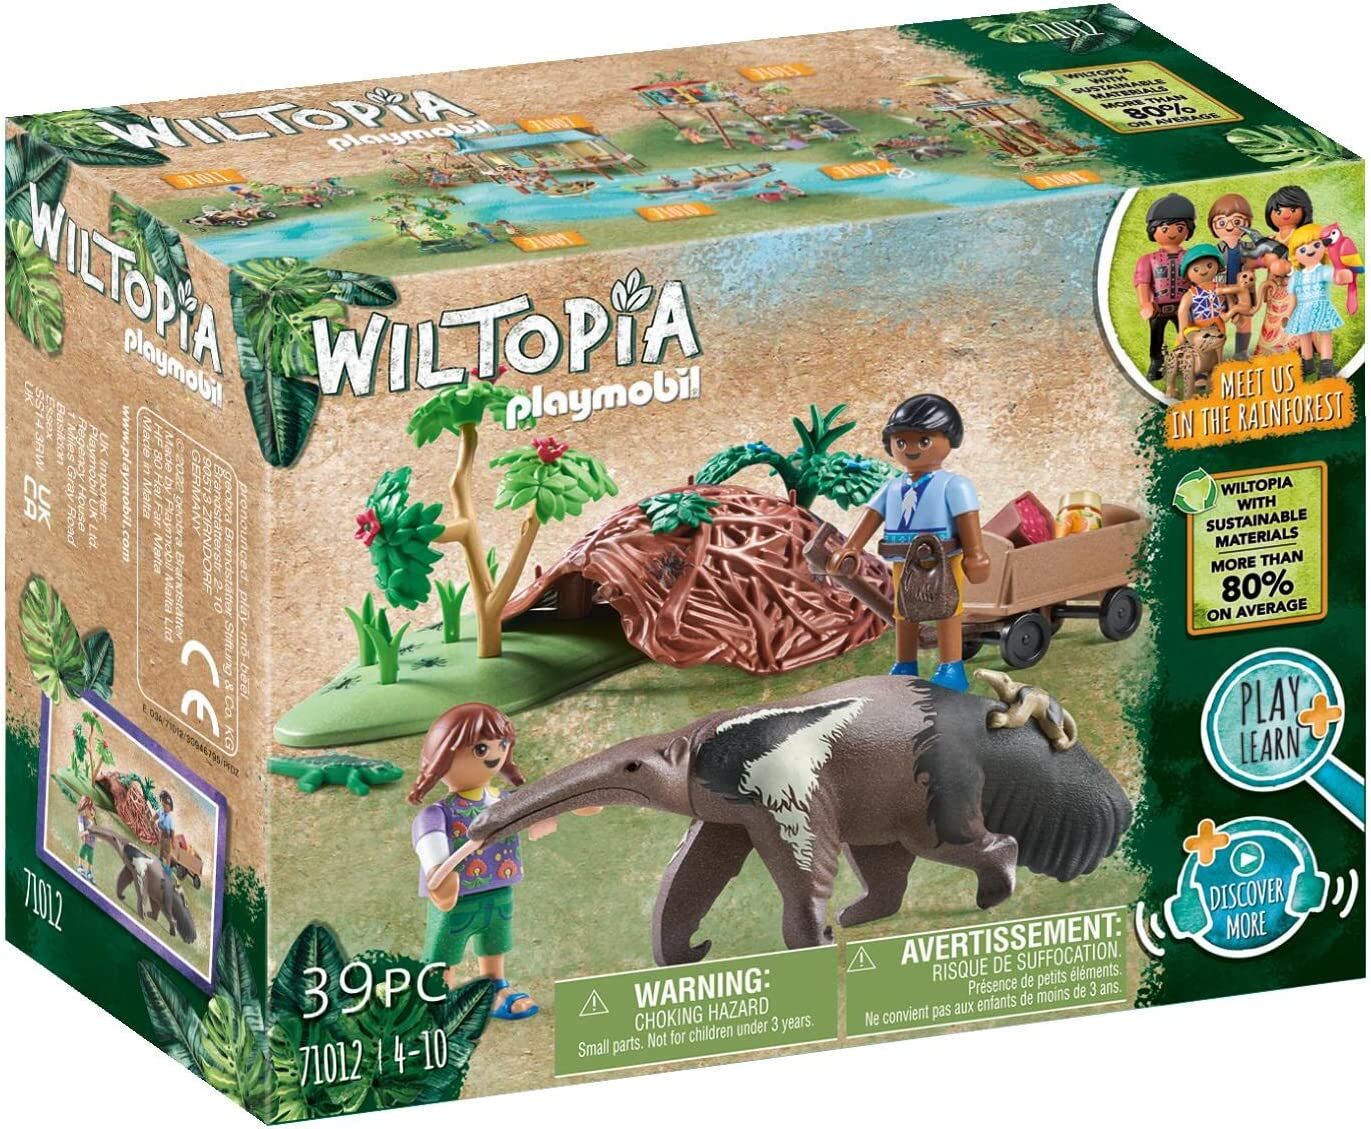 Wiltopia - Anteater Care (721012) Review 